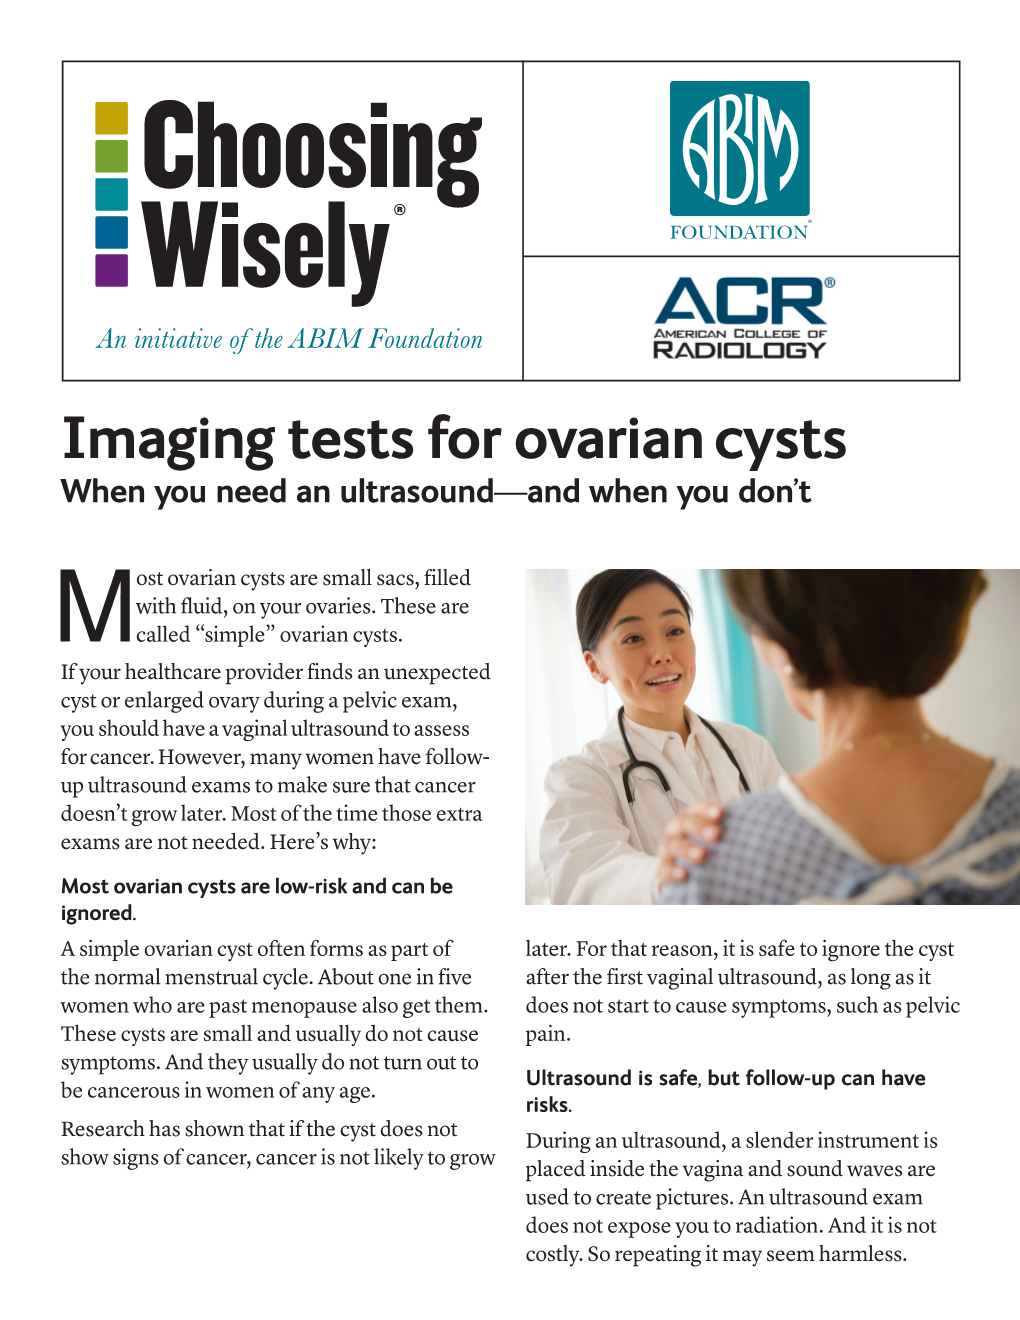 Imaging Tests for Ovarian Cysts When You Need an Ultrasound—And When You Don’T